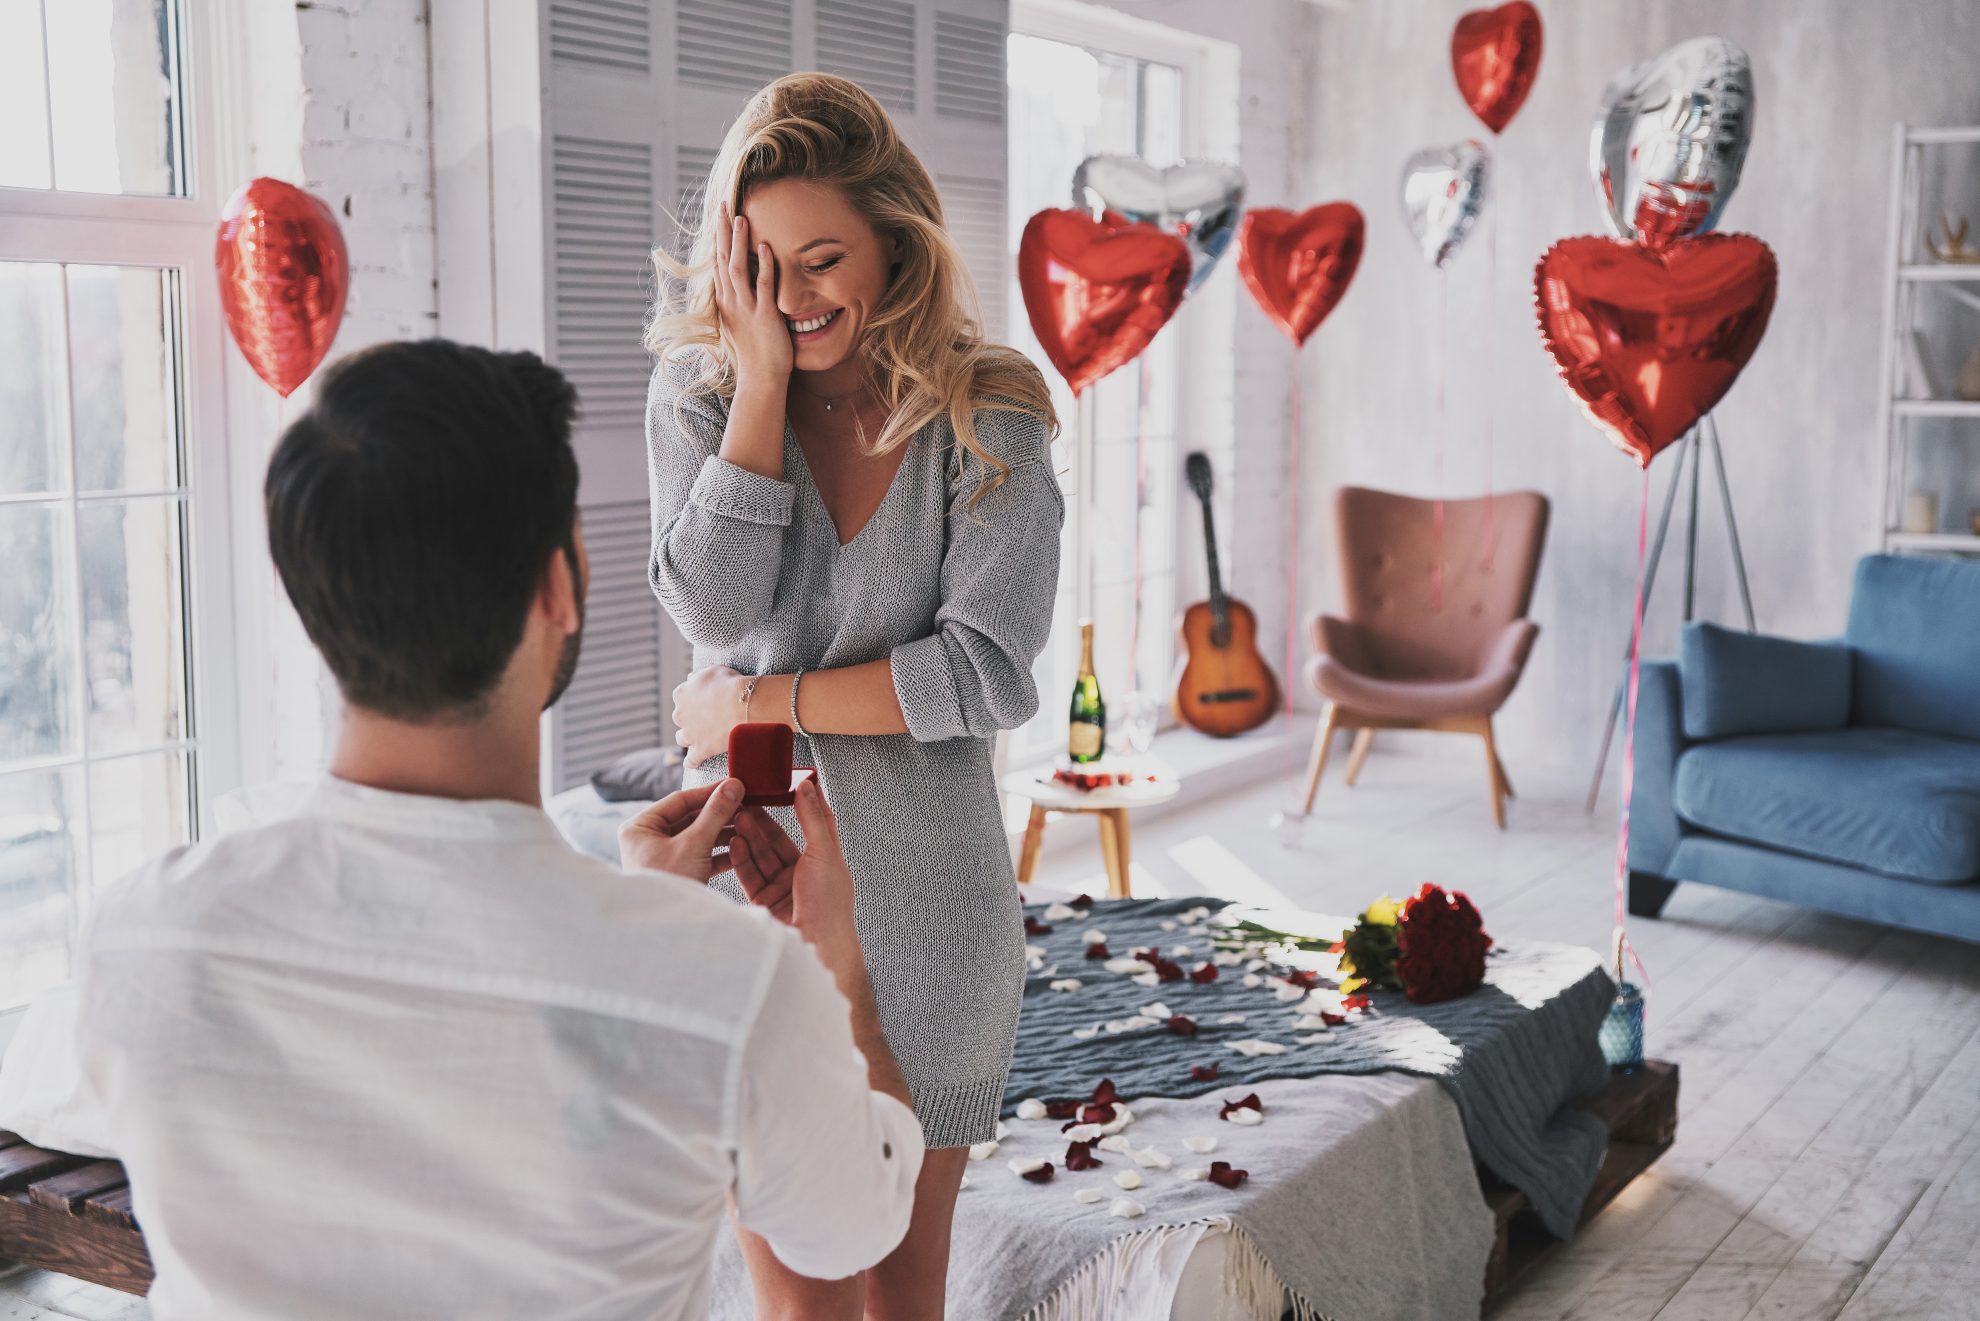 This image shows a man proposing to a woman. The man is down on one knee and a selection of heart balloons can be seen behind the woman. Image used in the The Top 14 Things You Need To Do Once You're Engaged article. 